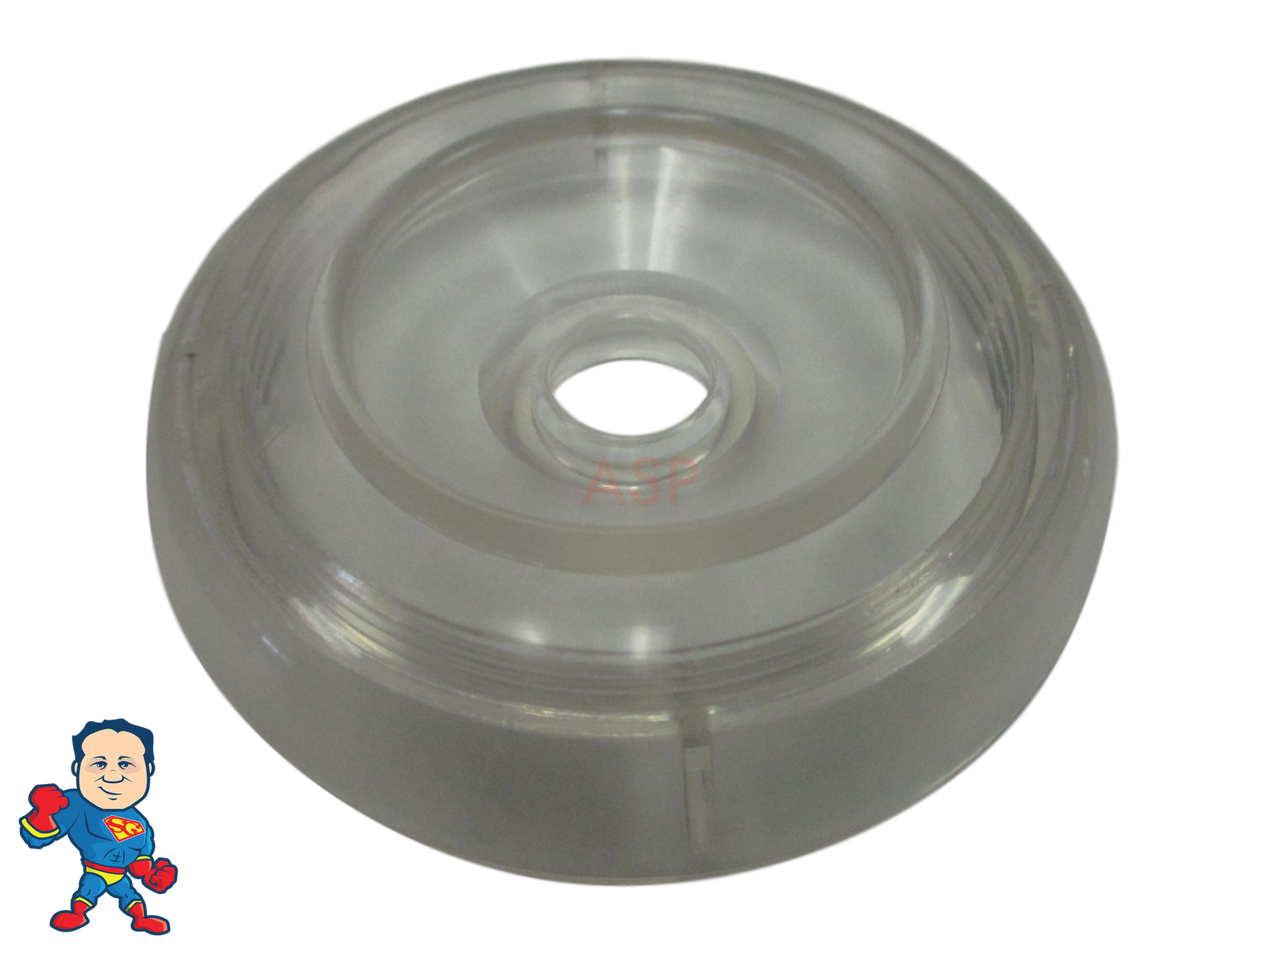 Spa Hot Tub Diverter Cap 3 3/4" Wide White Notched Buttress Style How To Video 